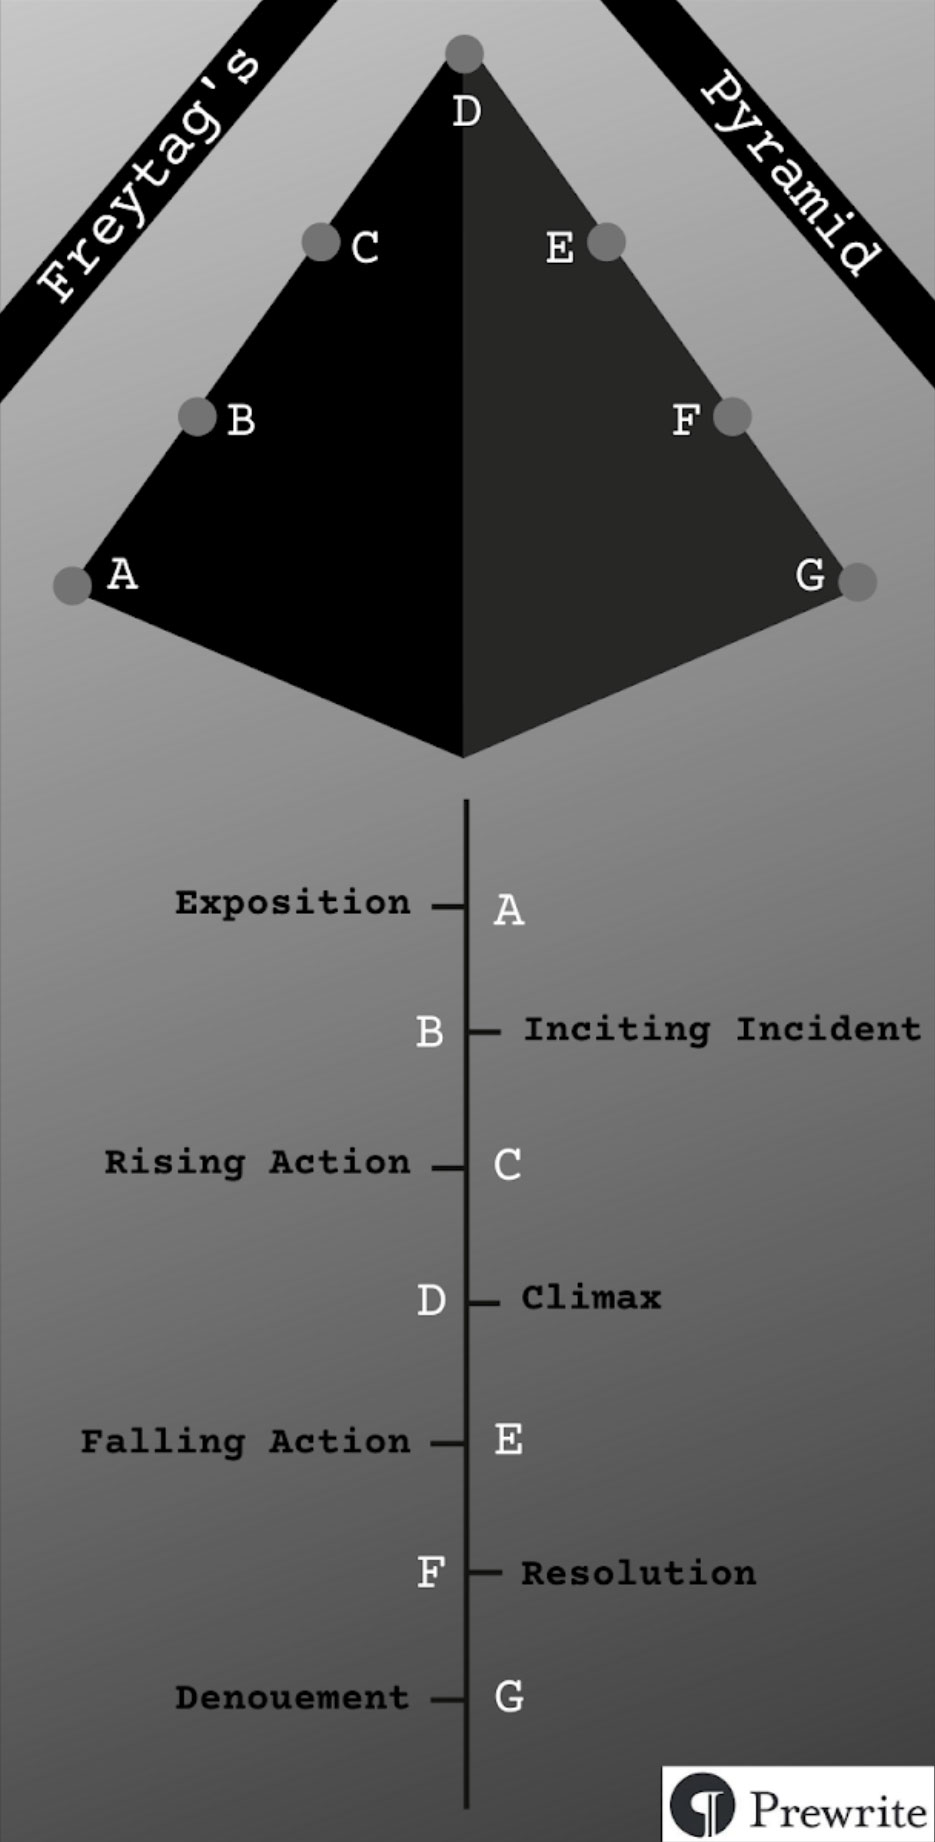 Picture of a pyramid graphic.